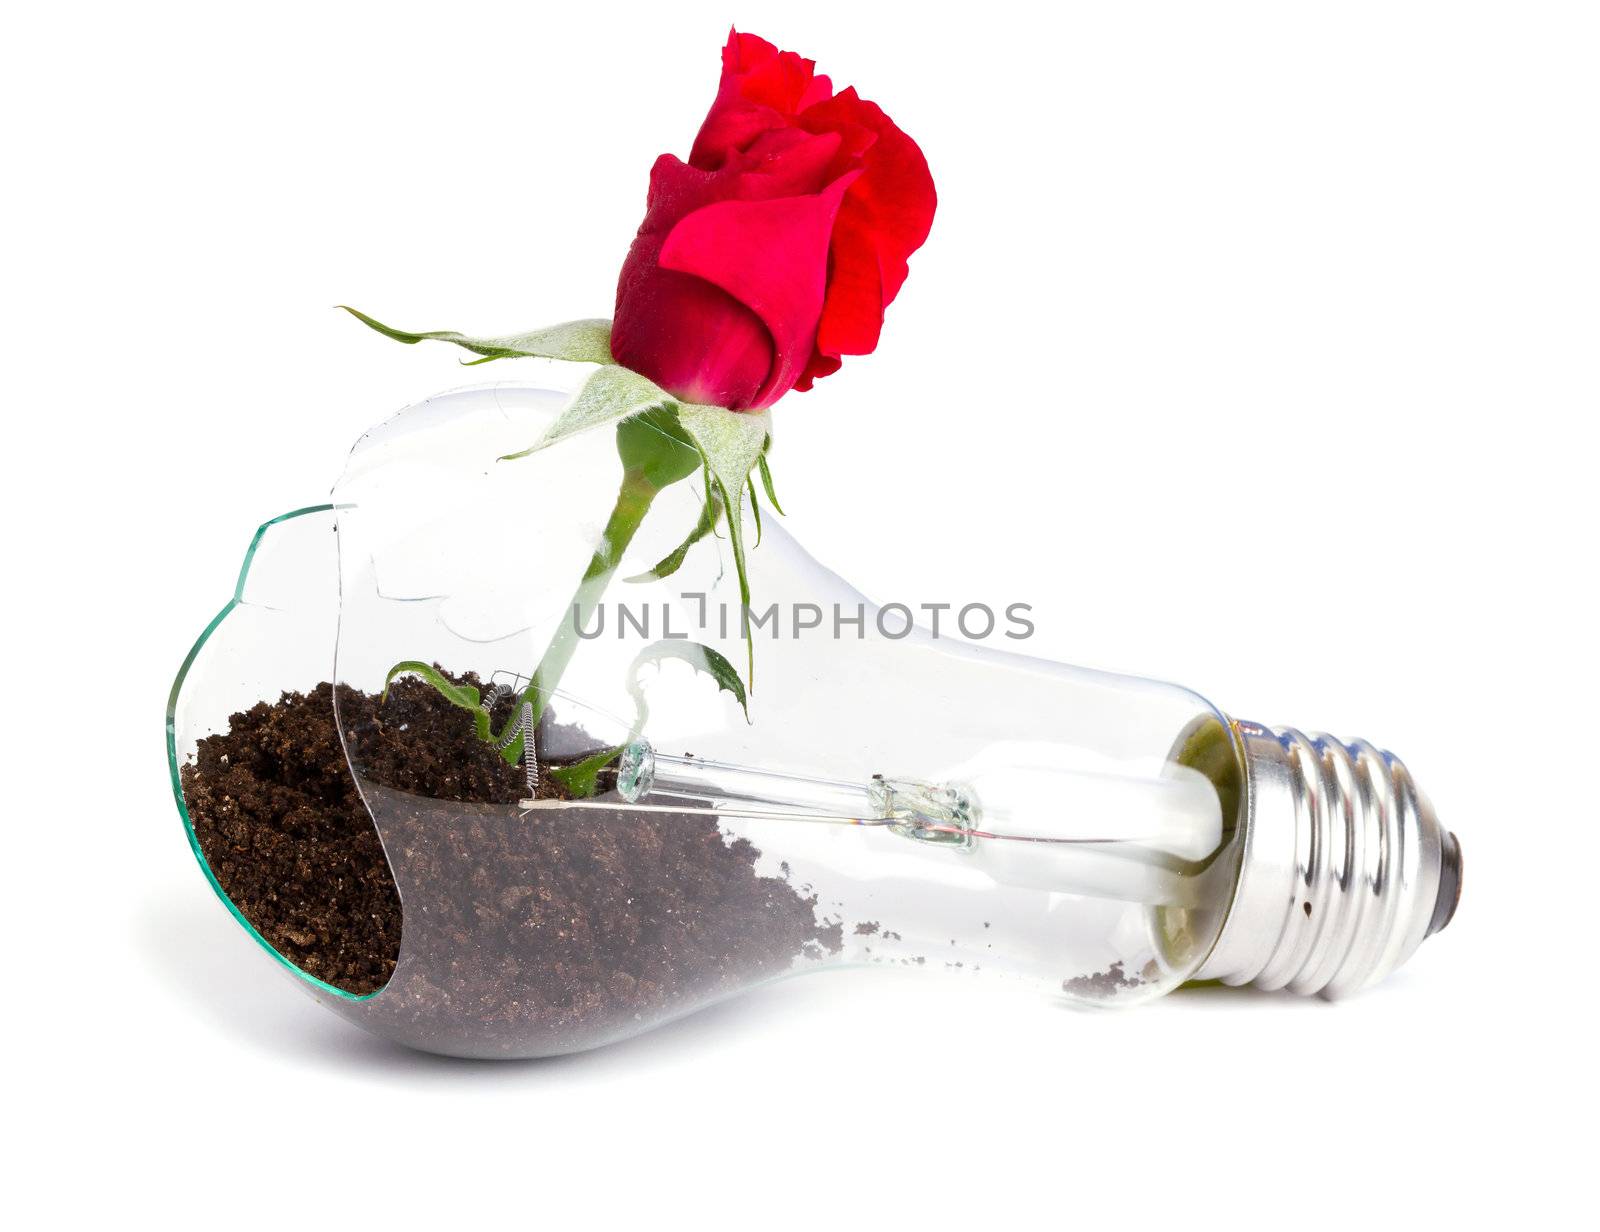 lightbulb with plant growing inside by Bedolaga